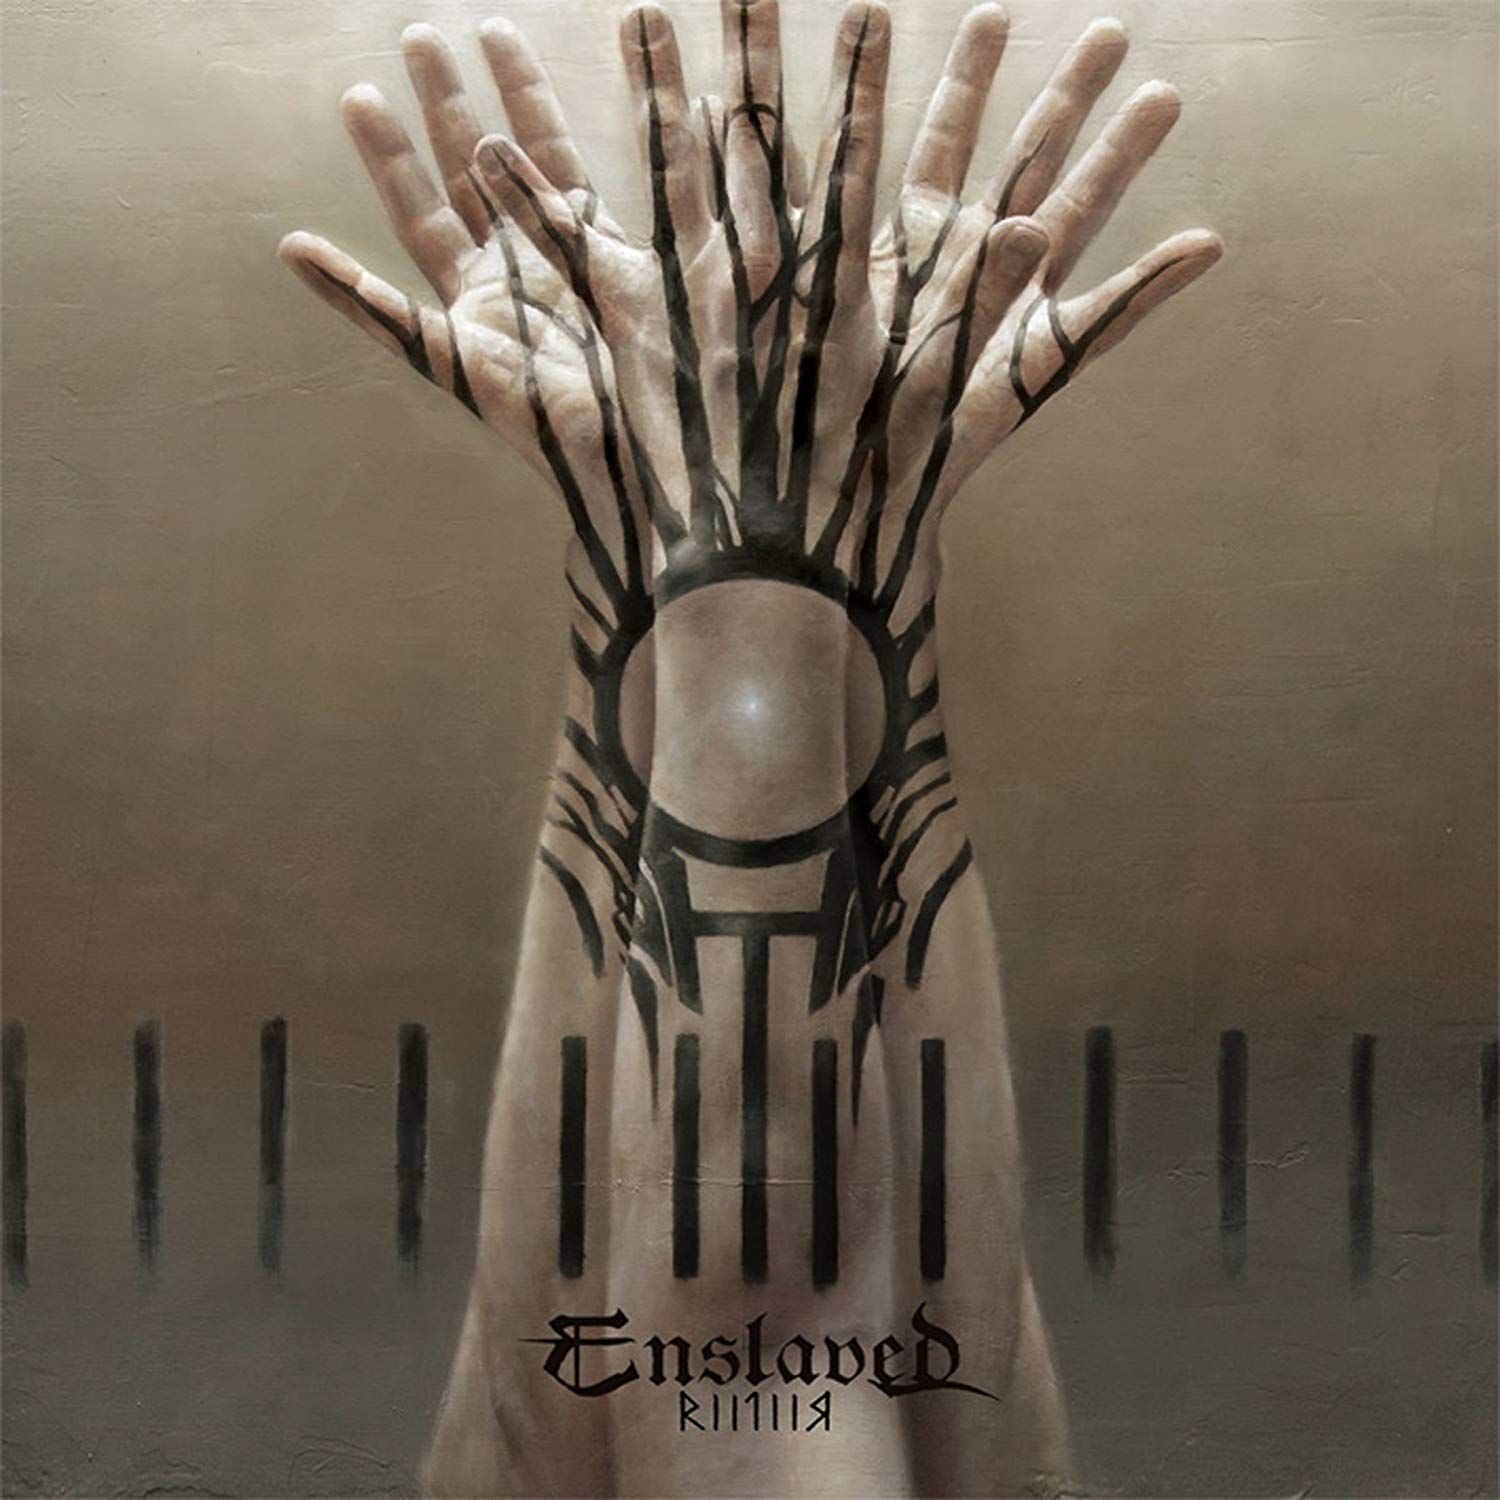 Vinyl Record Enslaved - Riitiir (Limited Edition) (2 LP)